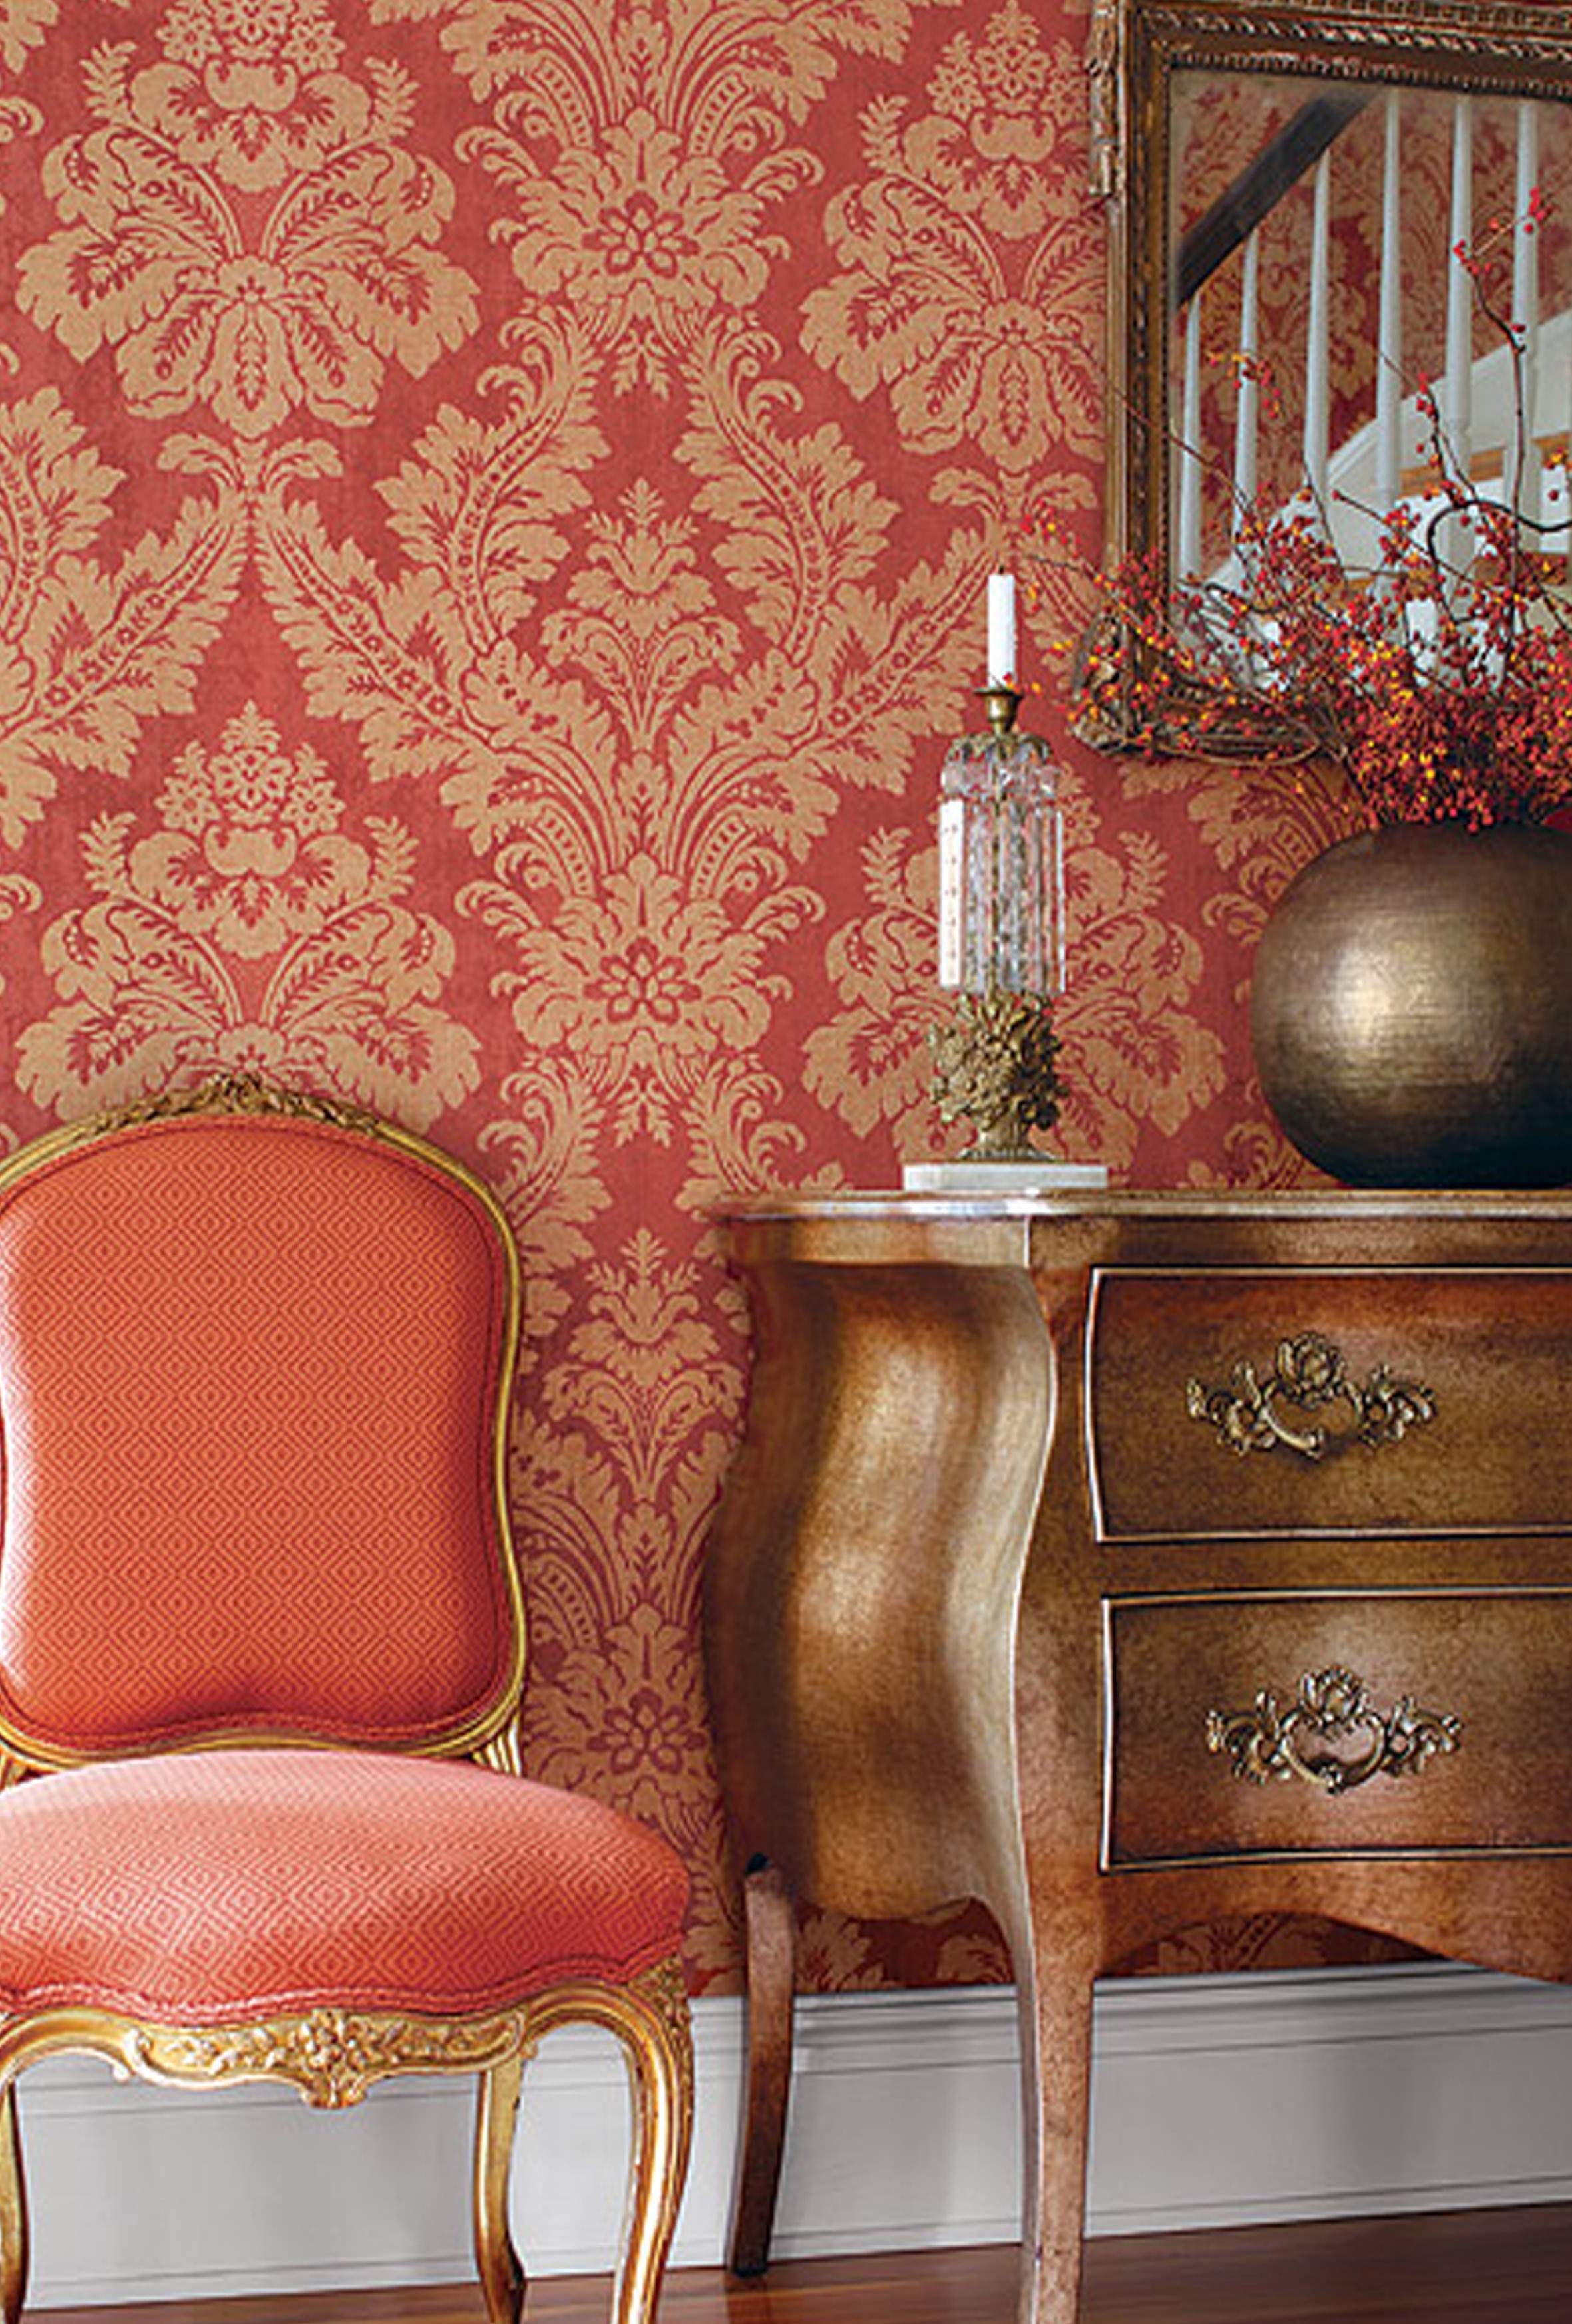 Damask Thibaut Wallpaper Brands The Best Place